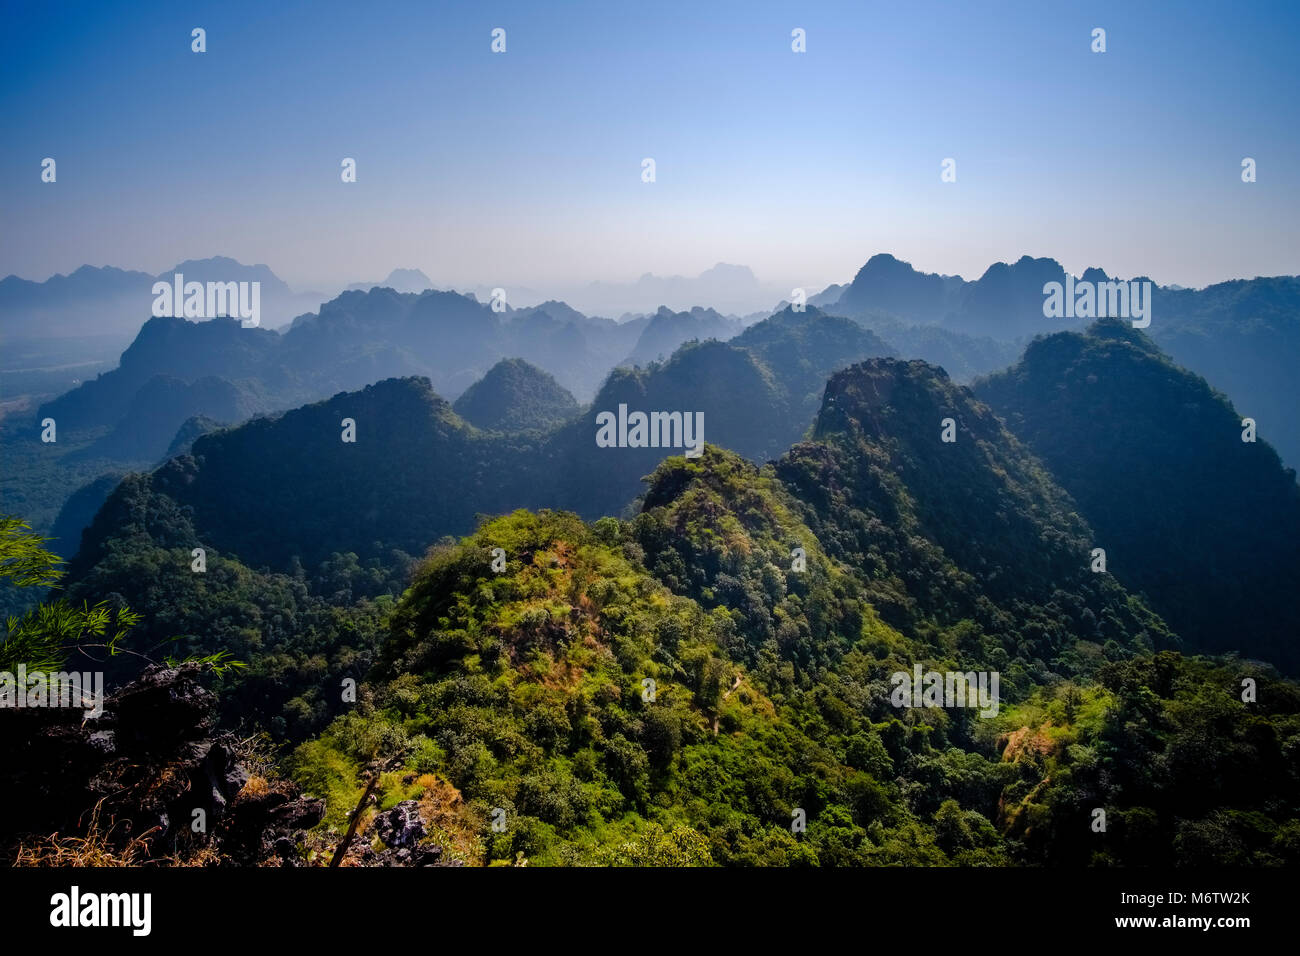 Aerial view on a rugged mountain range, seen from Mt. Zwegabin after sunrise Stock Photo